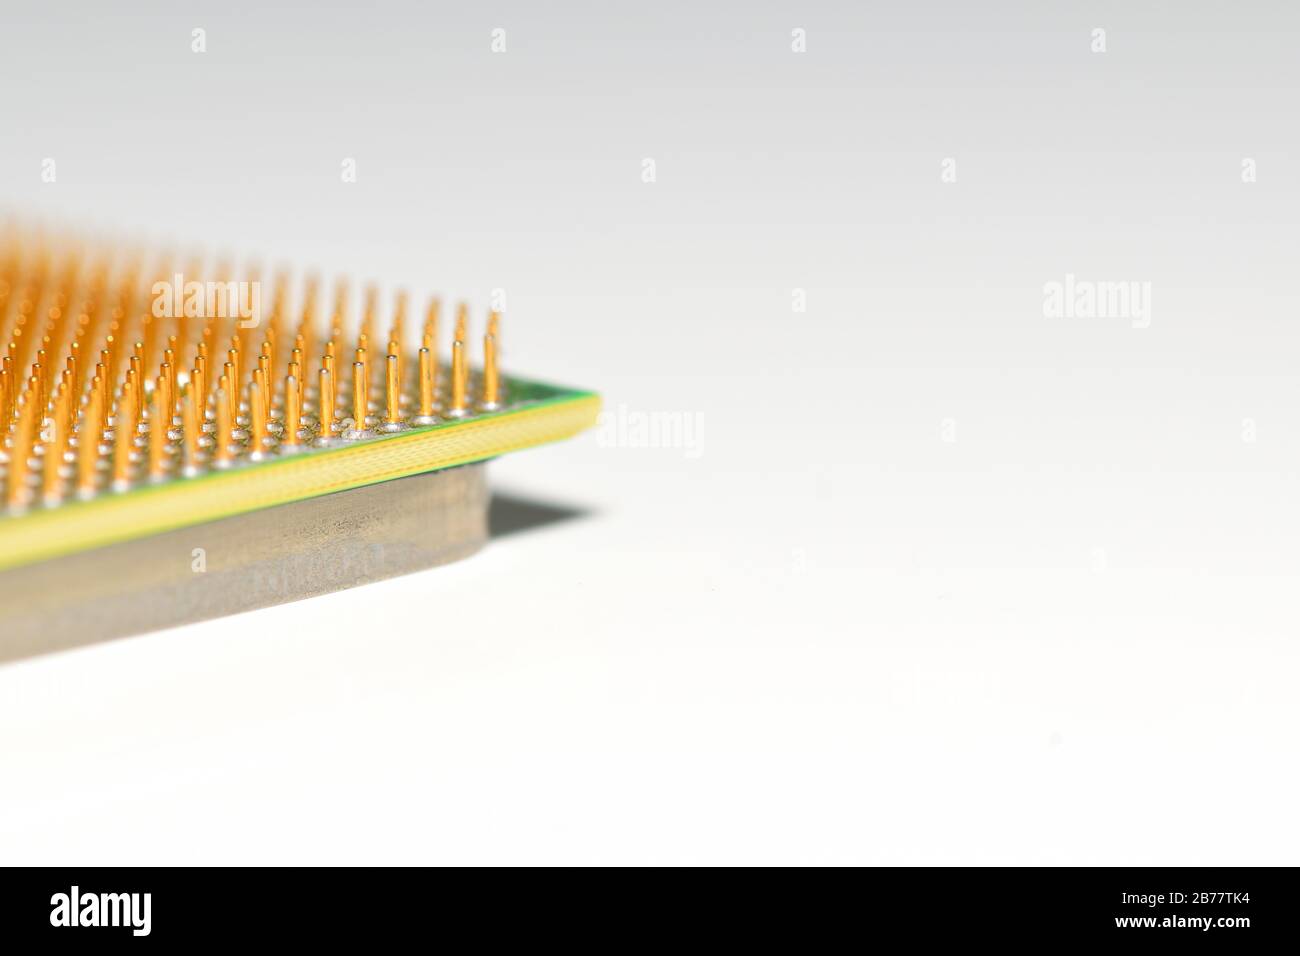 Central processor unit. Golden pins of a core. Copy space. Shallow depth of field. White background. Stock Photo